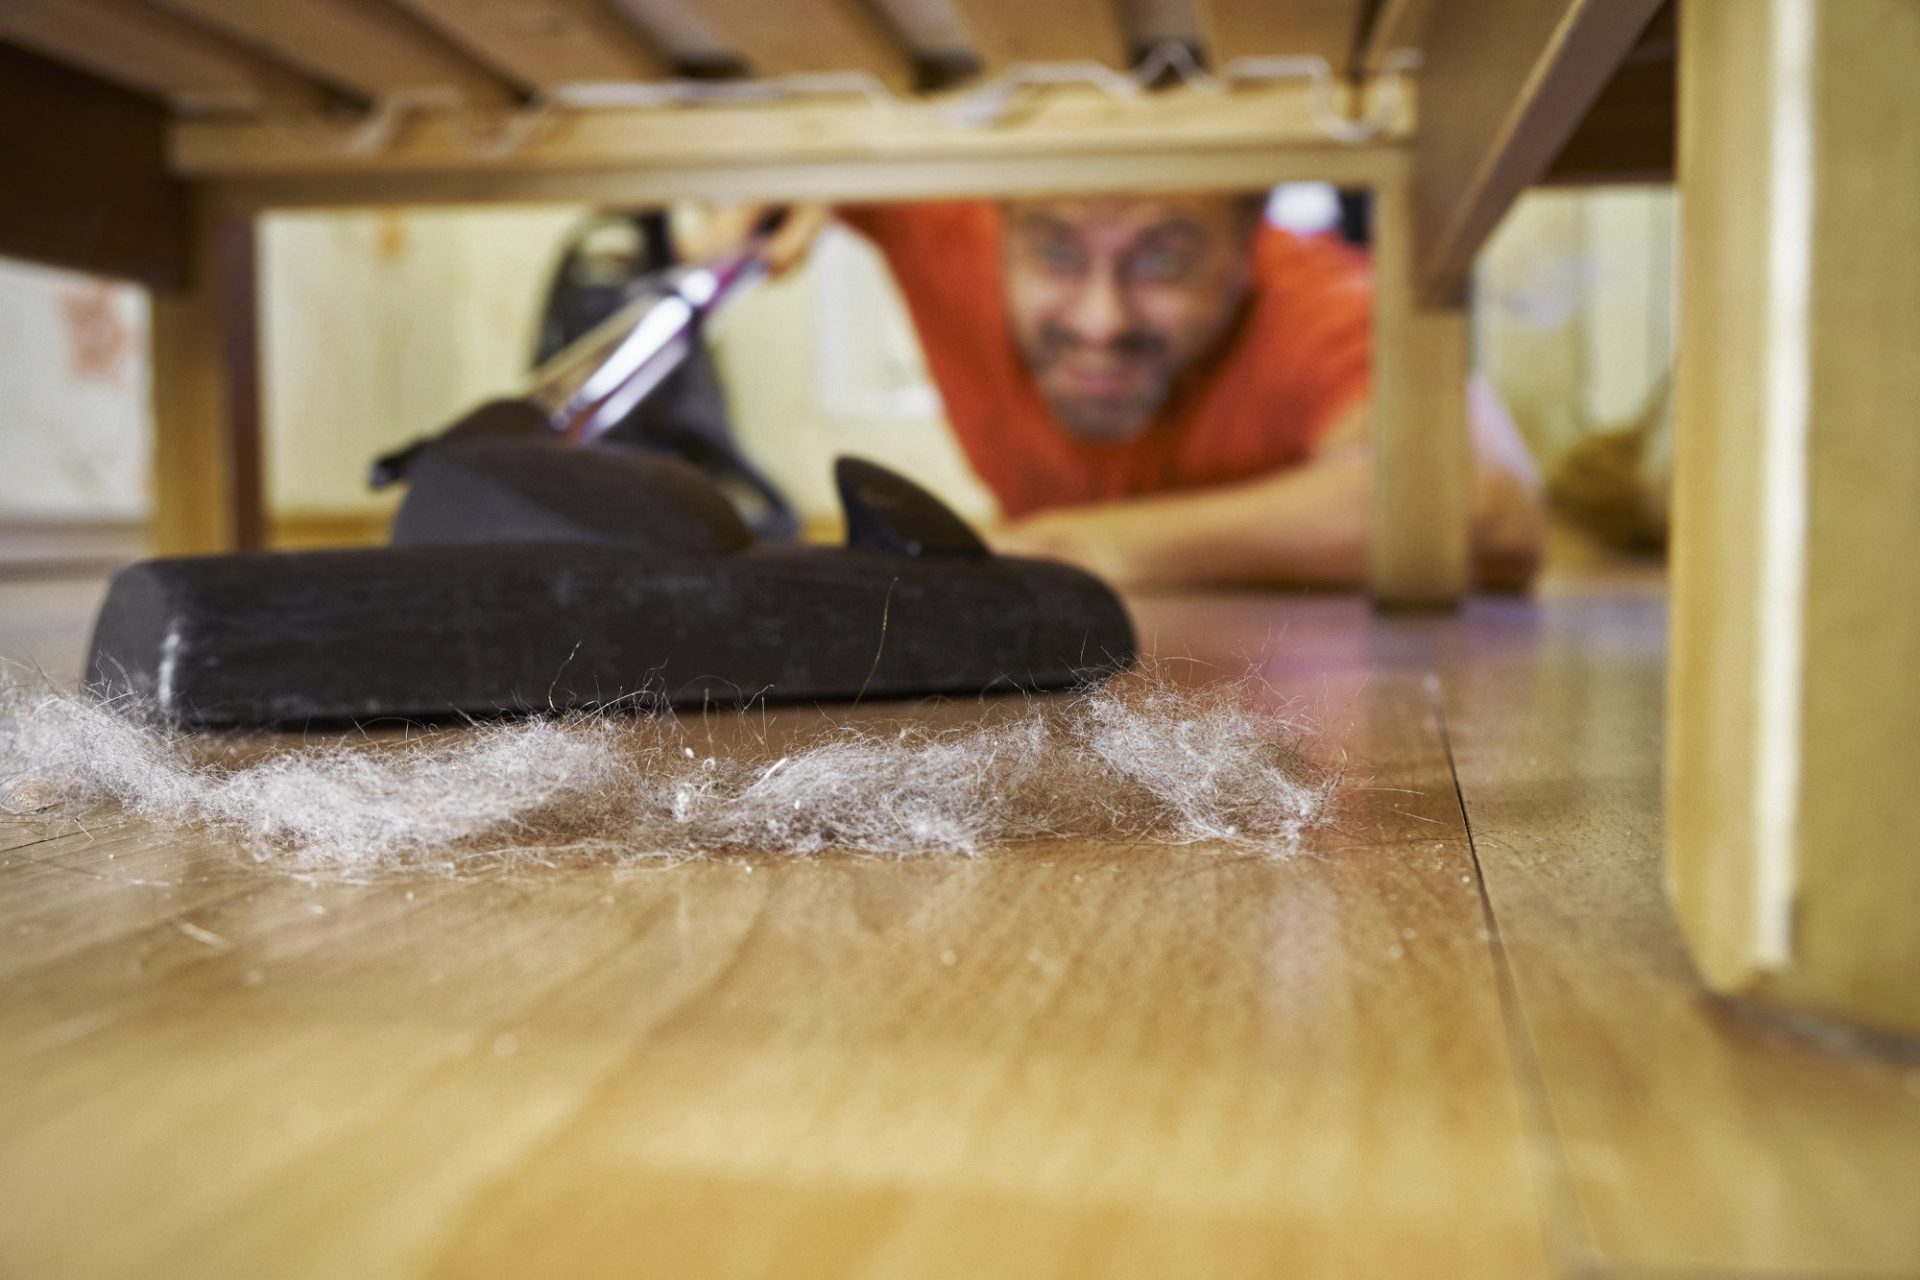 You can use a hair dryer to remove dust bunnies from under the bed